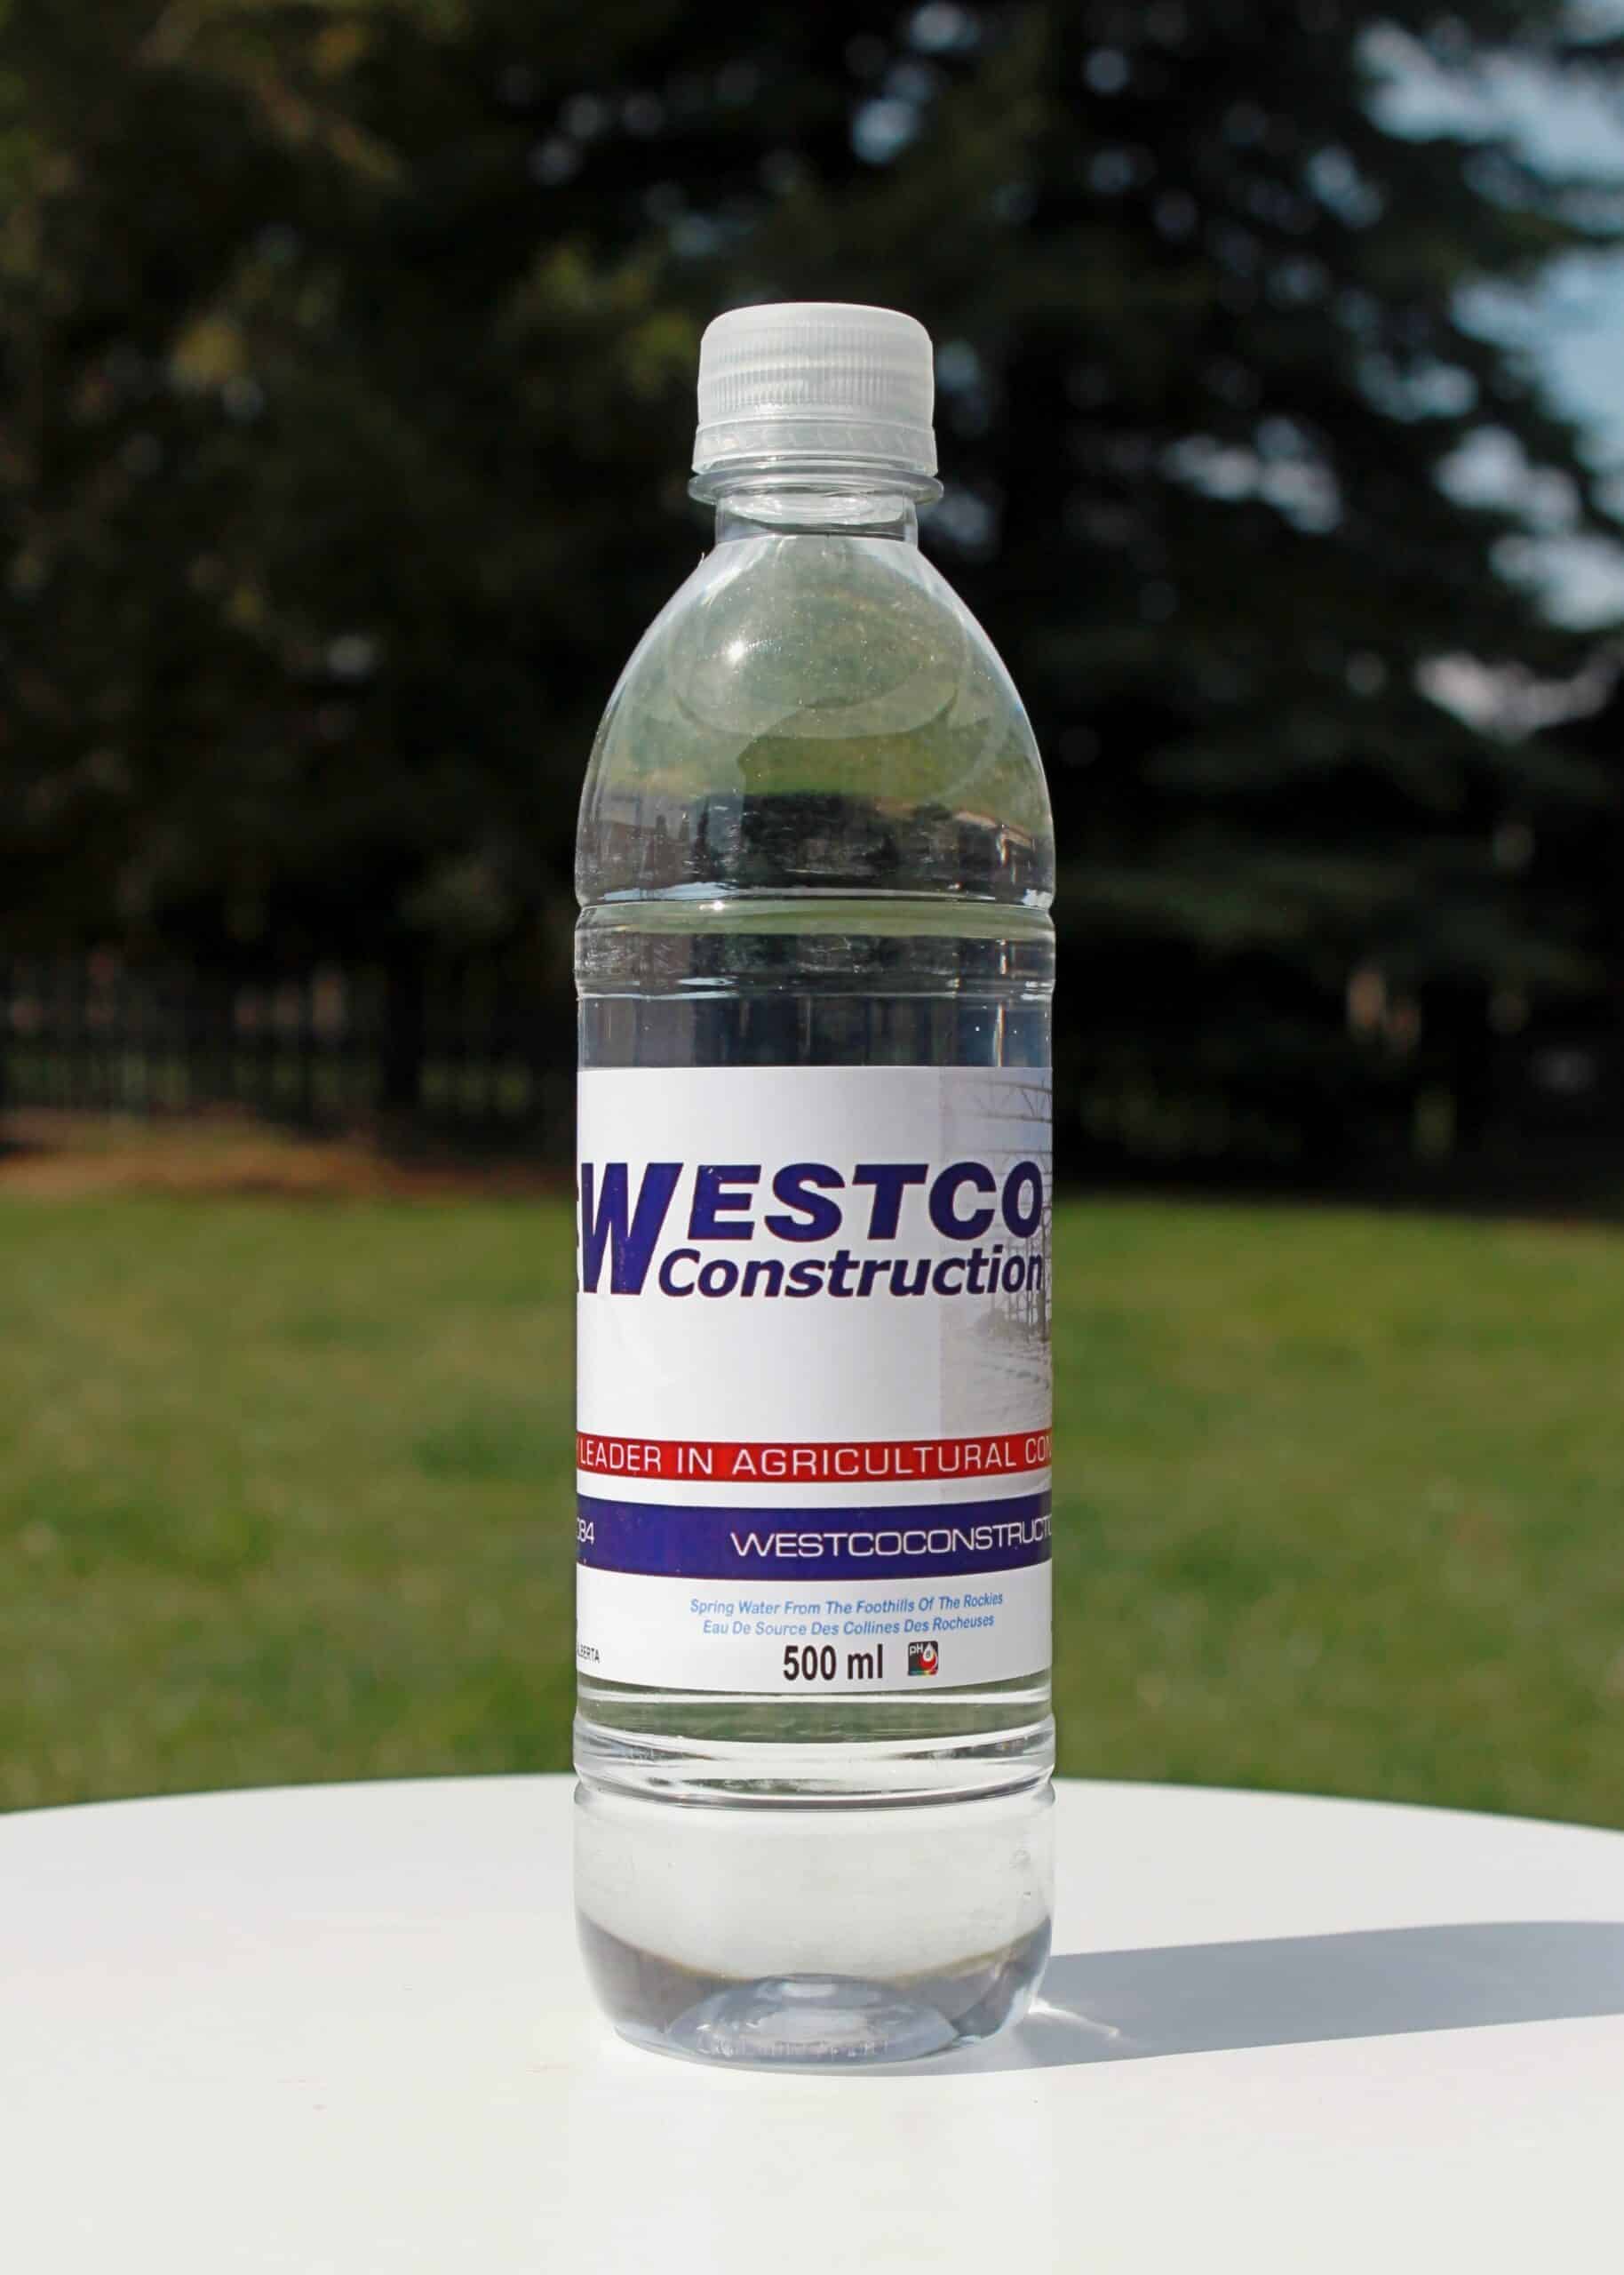 https://yourchoicebottledwater.com/wp-content/uploads/2020/07/IMG_0033-Westco-Construction-scaled.jpg